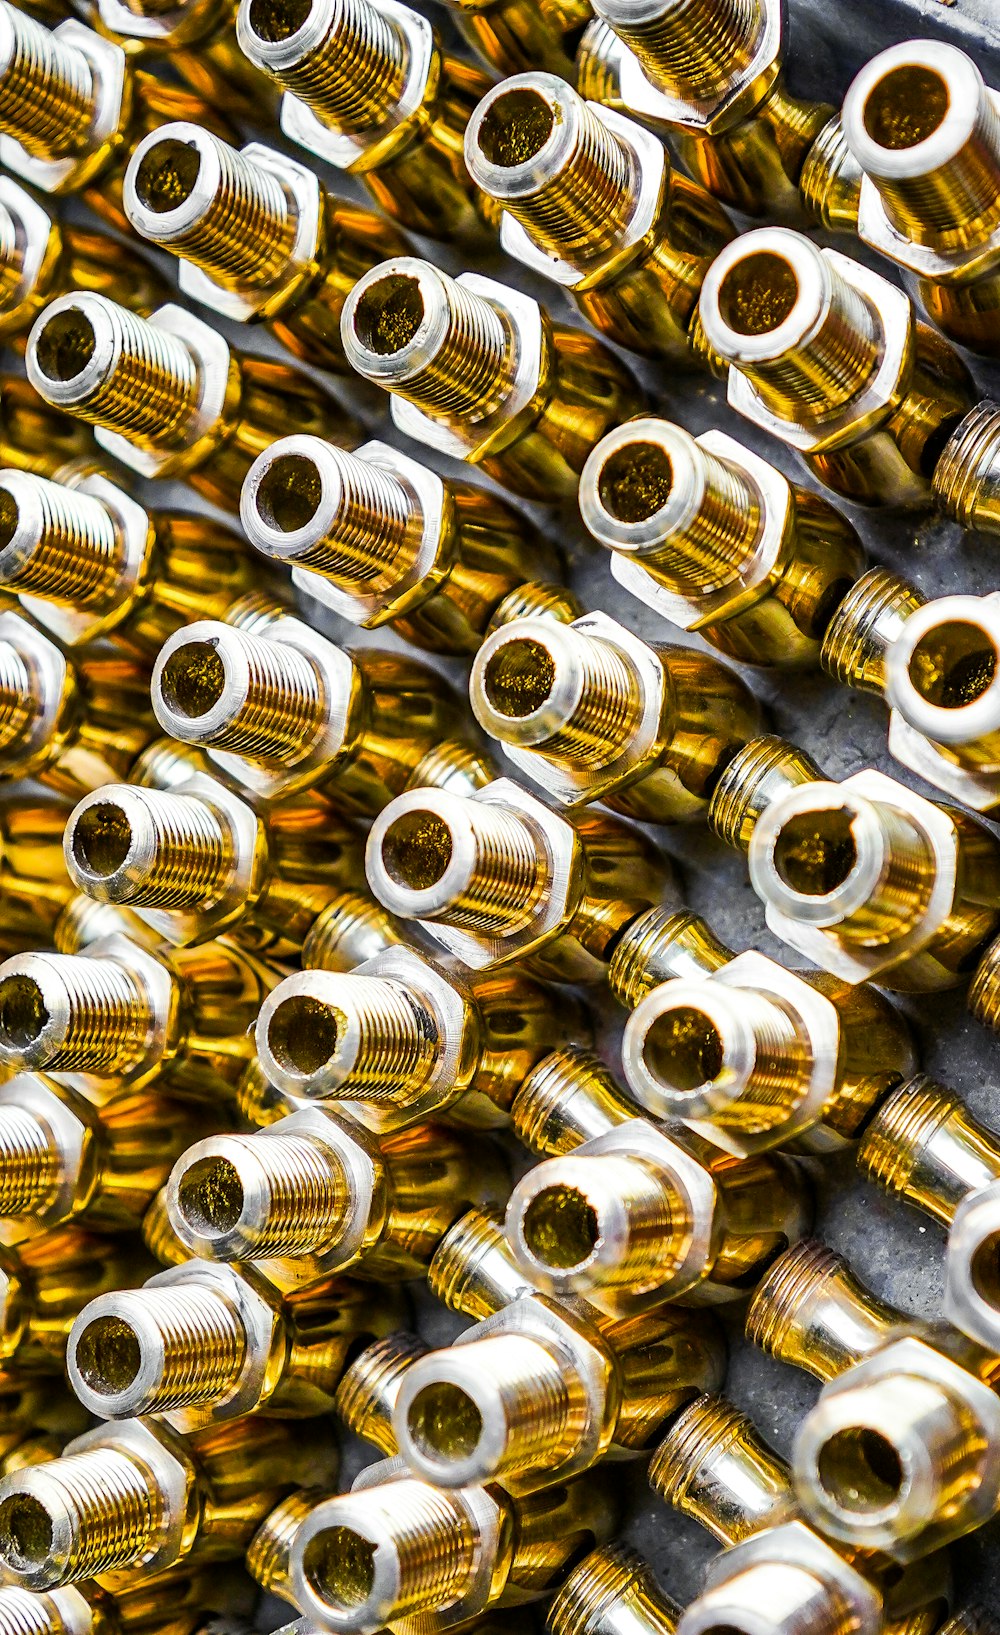 a bunch of yellow and silver hoses lined up together